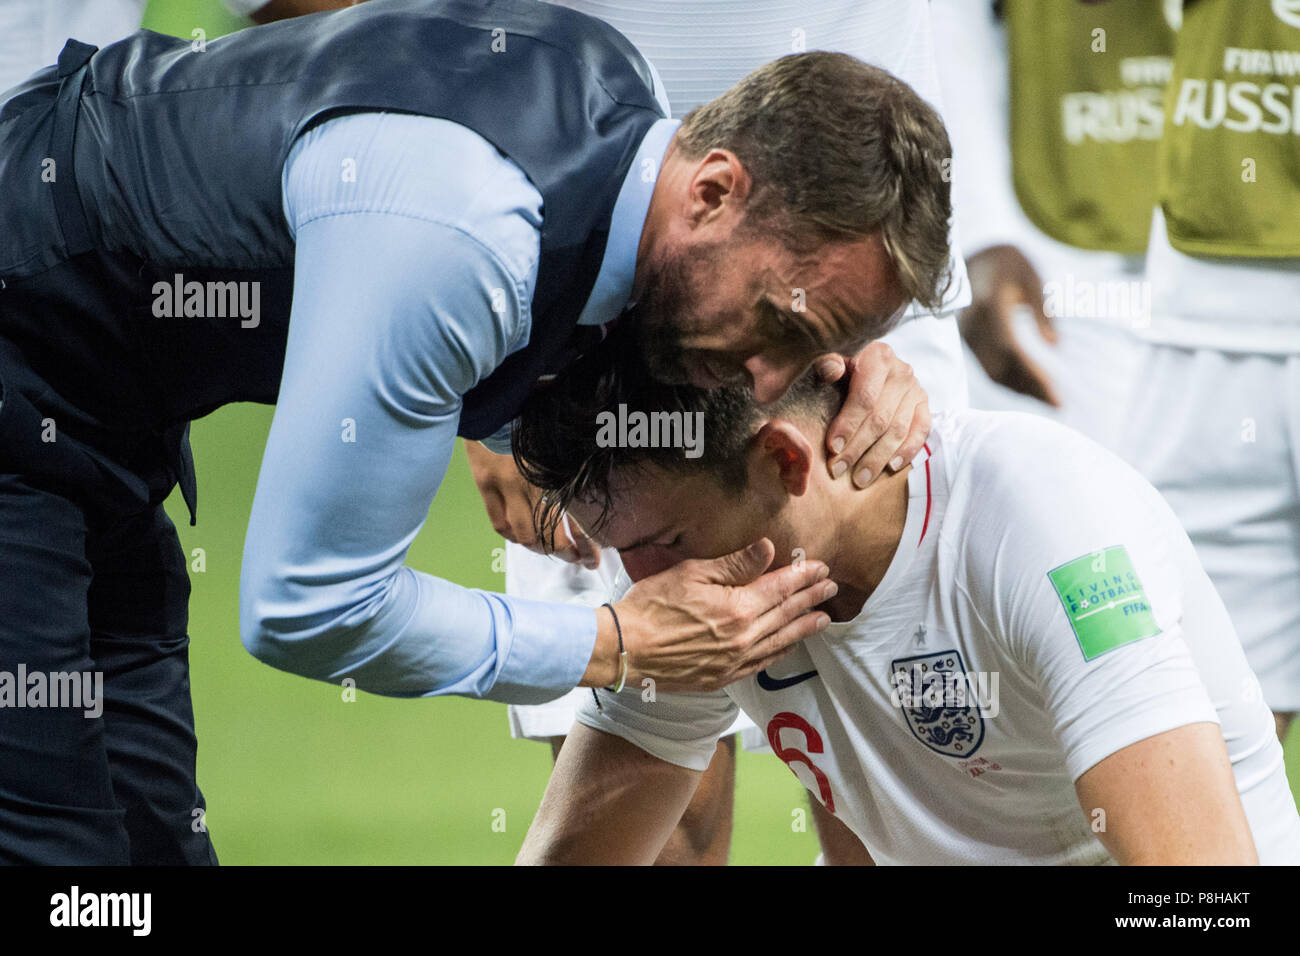 Gareth SOUTHGATE (left, coach, ENG) troubles Harry MAGUIRE (ENG), comfort, comfort, frustrated, frustrated, late, disappointed, disappointed, disappointment, disappointment, sad, half figure, half figure, gesture, gesture, Croatia ( CRO) - England (ENG) 2: 1, semi-finals, match 62, on 11.07.2018 in Moscow; Football World Cup 2018 in Russia from 14.06. - 15.07.2018. | Usage worldwide Stock Photo